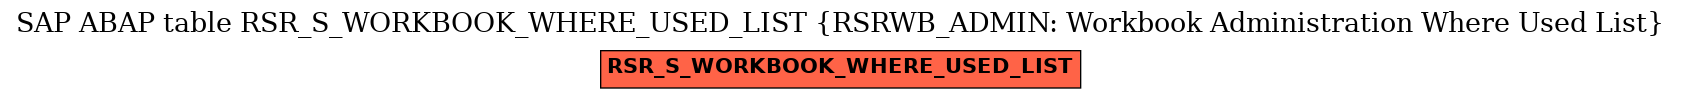 E-R Diagram for table RSR_S_WORKBOOK_WHERE_USED_LIST (RSRWB_ADMIN: Workbook Administration Where Used List)